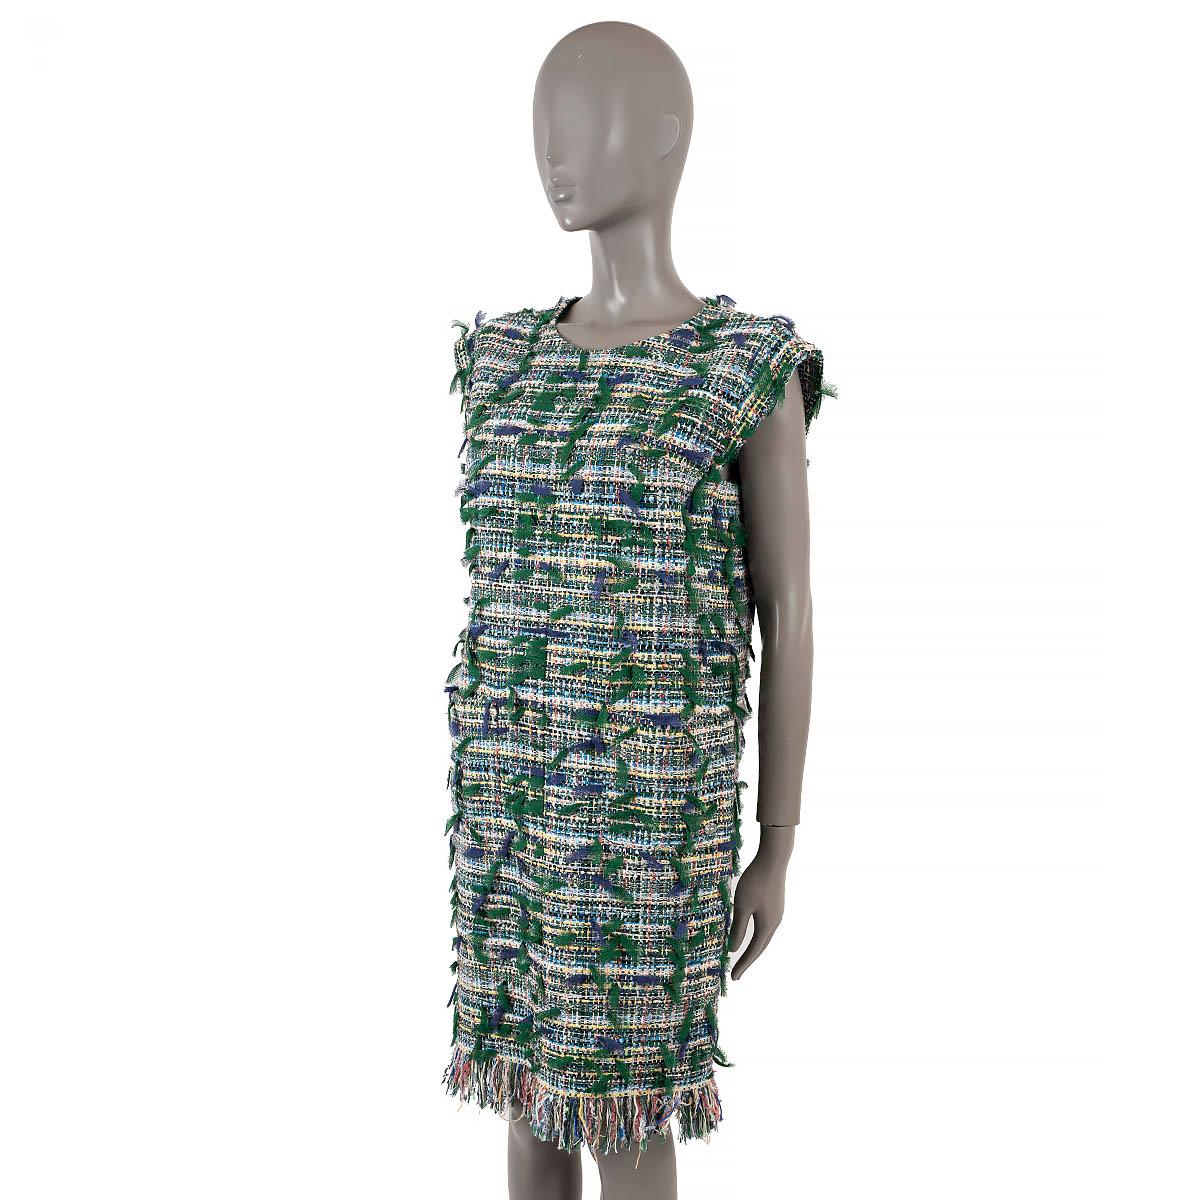 100% authentic Chanel tweed shift dress in green, blue and multicolor cotton (44%), silk (17%), polyamide (16%), viscose (9%), wool (5%), acrylic (3%), polyester (3%), metal polyester (1%) and linen (1%). Features a round neck, fringe details